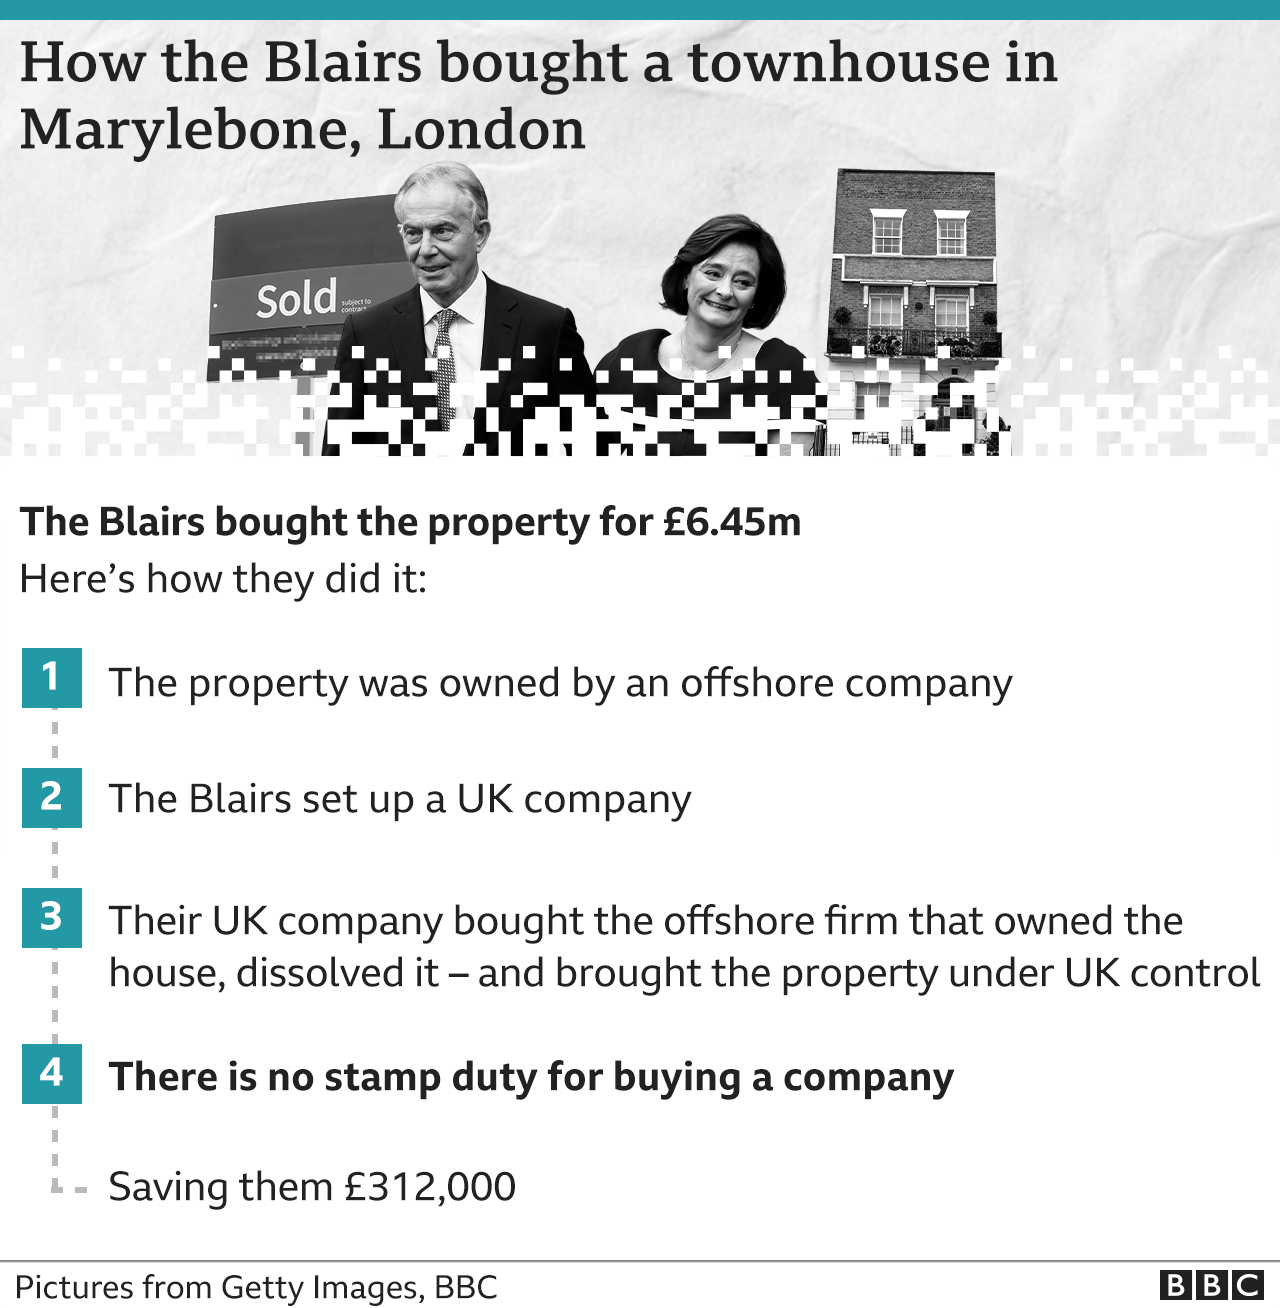 How the Blairs bought a townhouse in Marylebone, London - graphic